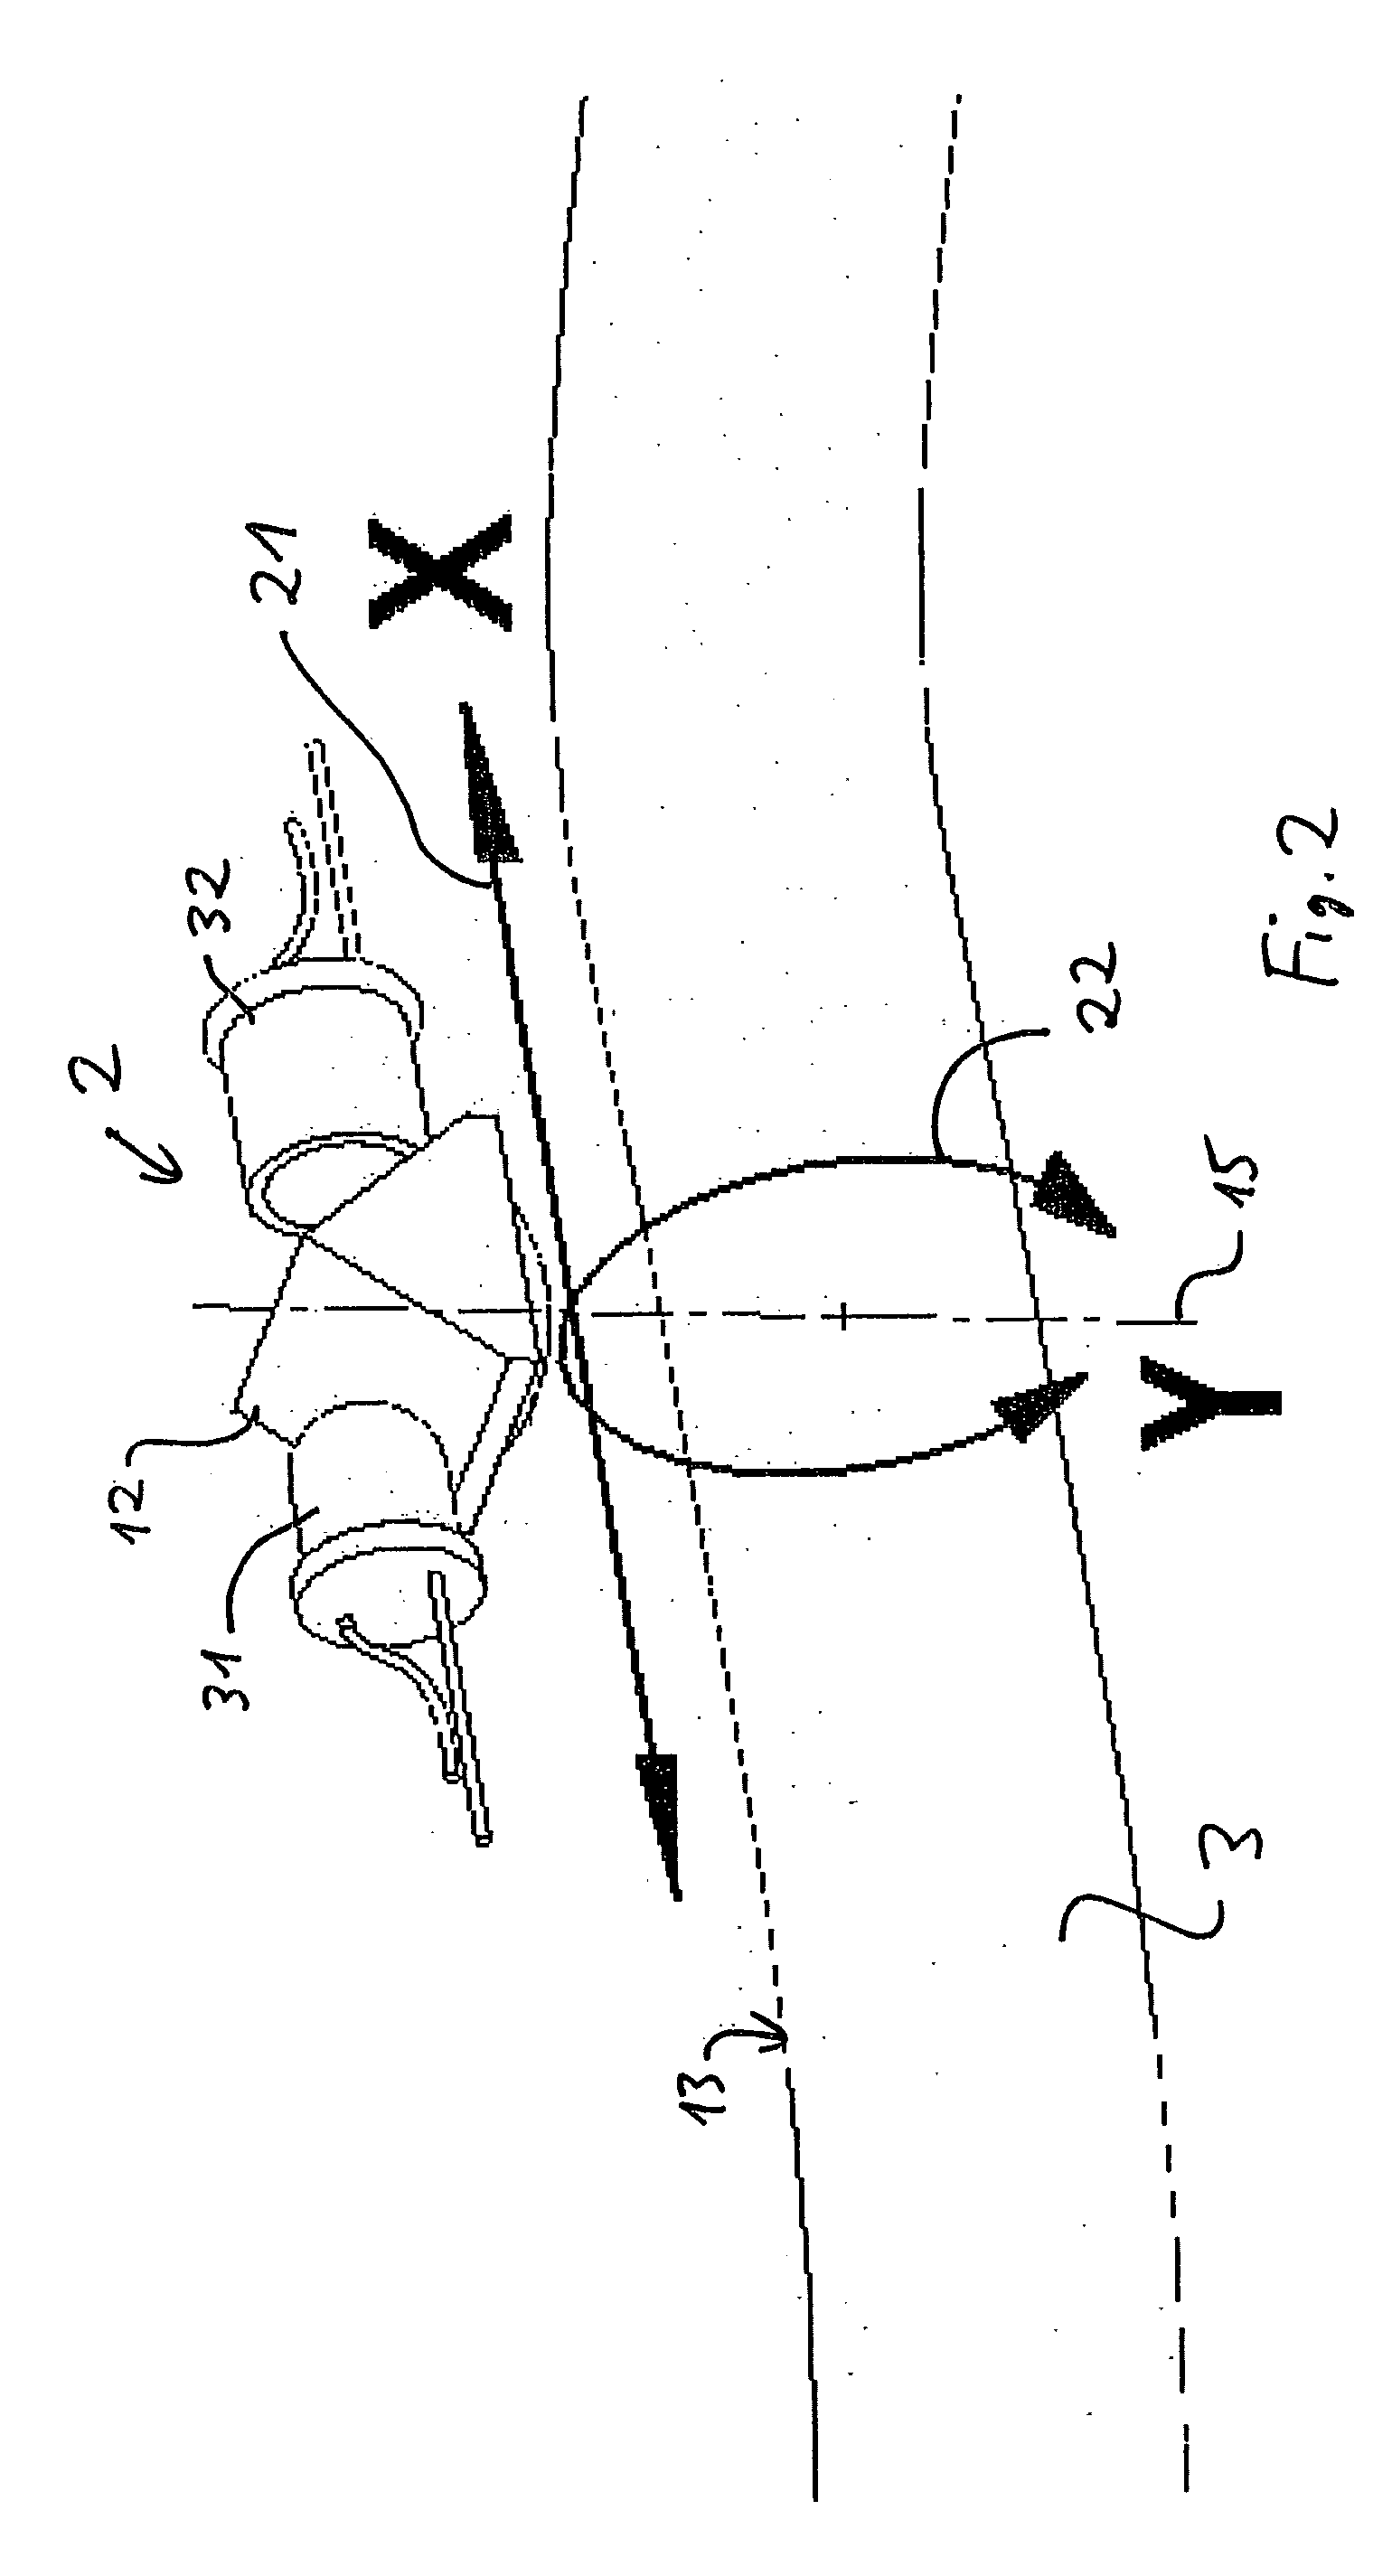 Device for determining the longitudinal and angular position of a rotationally symmetrical apparatus